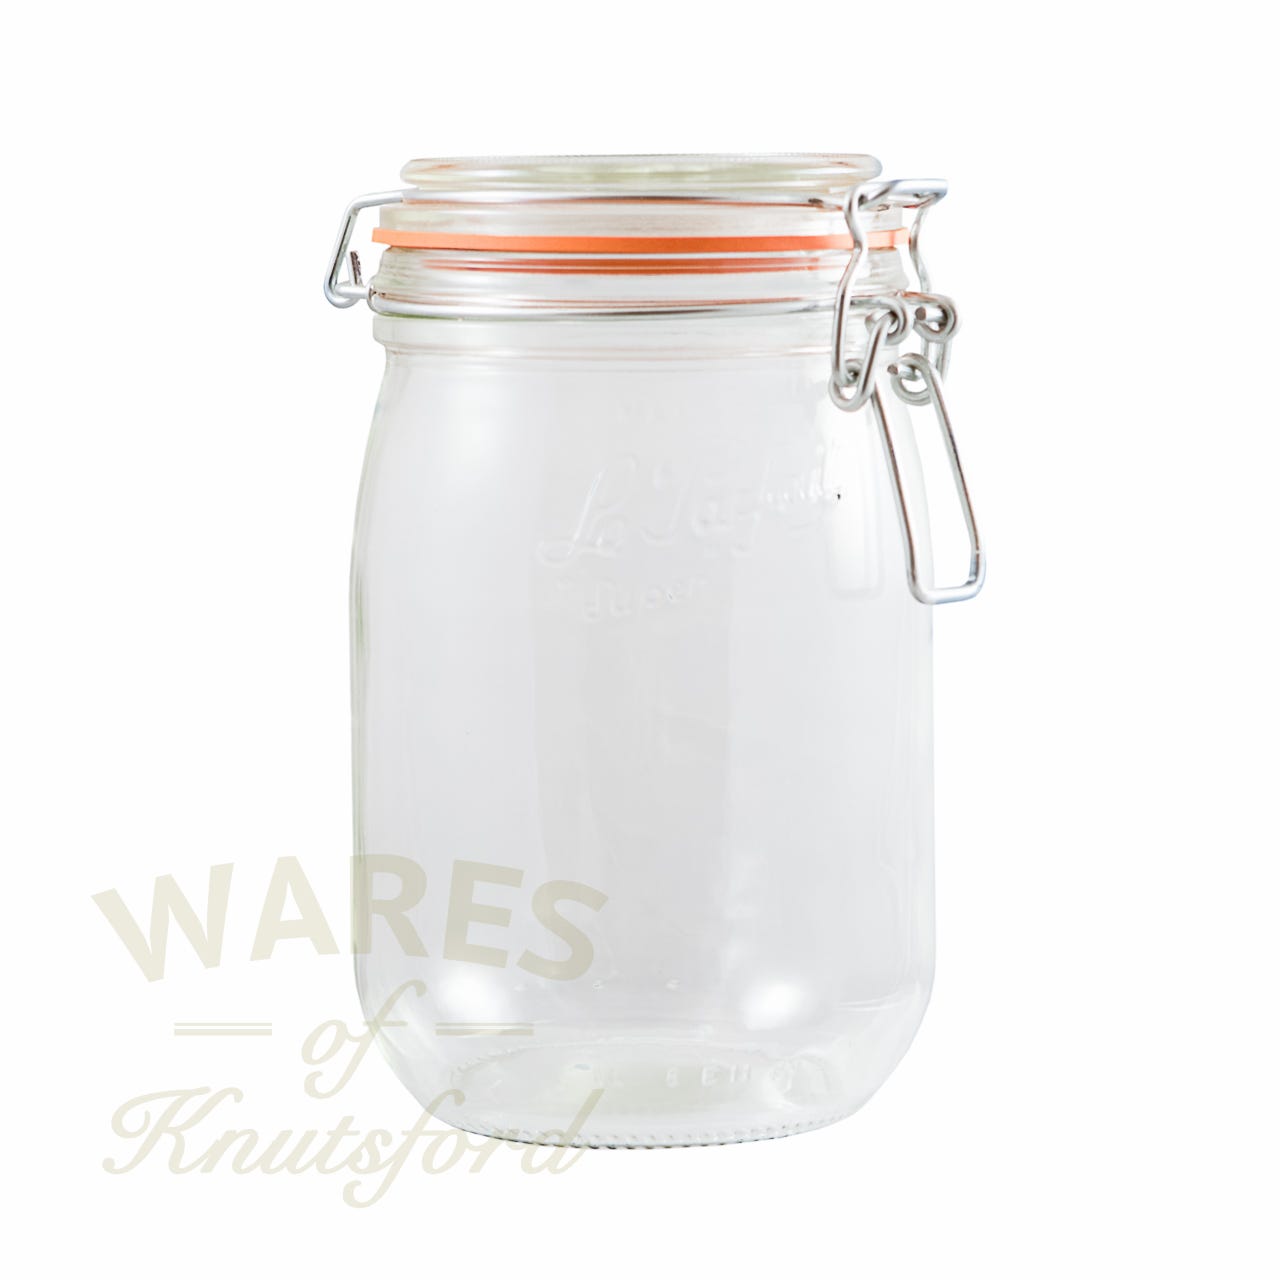 Clamp-Lid Jars: Food Storage Comes in All Shapes and Sizes - Food